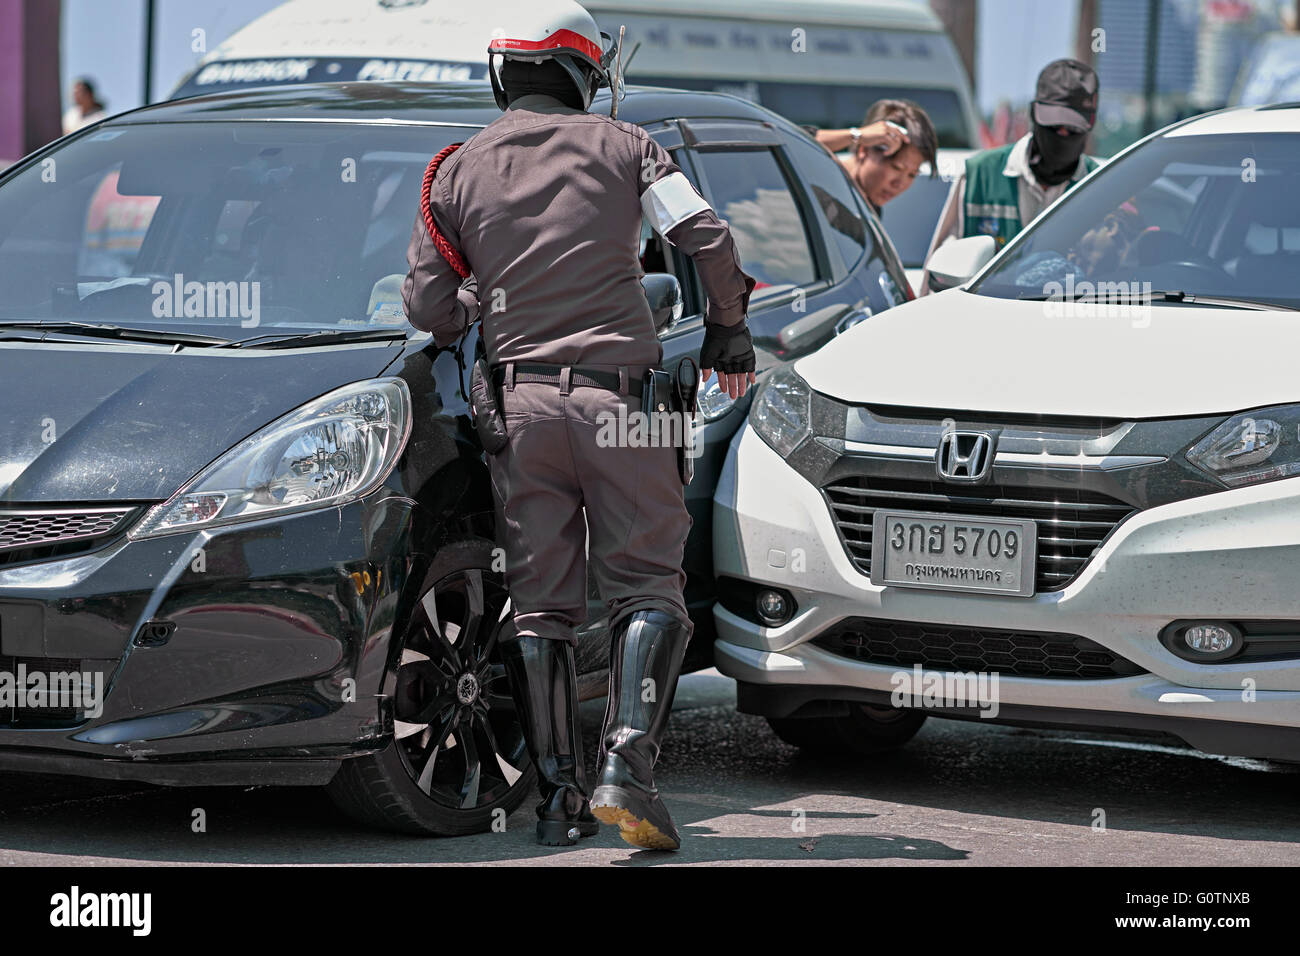 Thailand police officer attending a road accident involving the collision of two vehicles. Thailand S. E. Asia Stock Photo